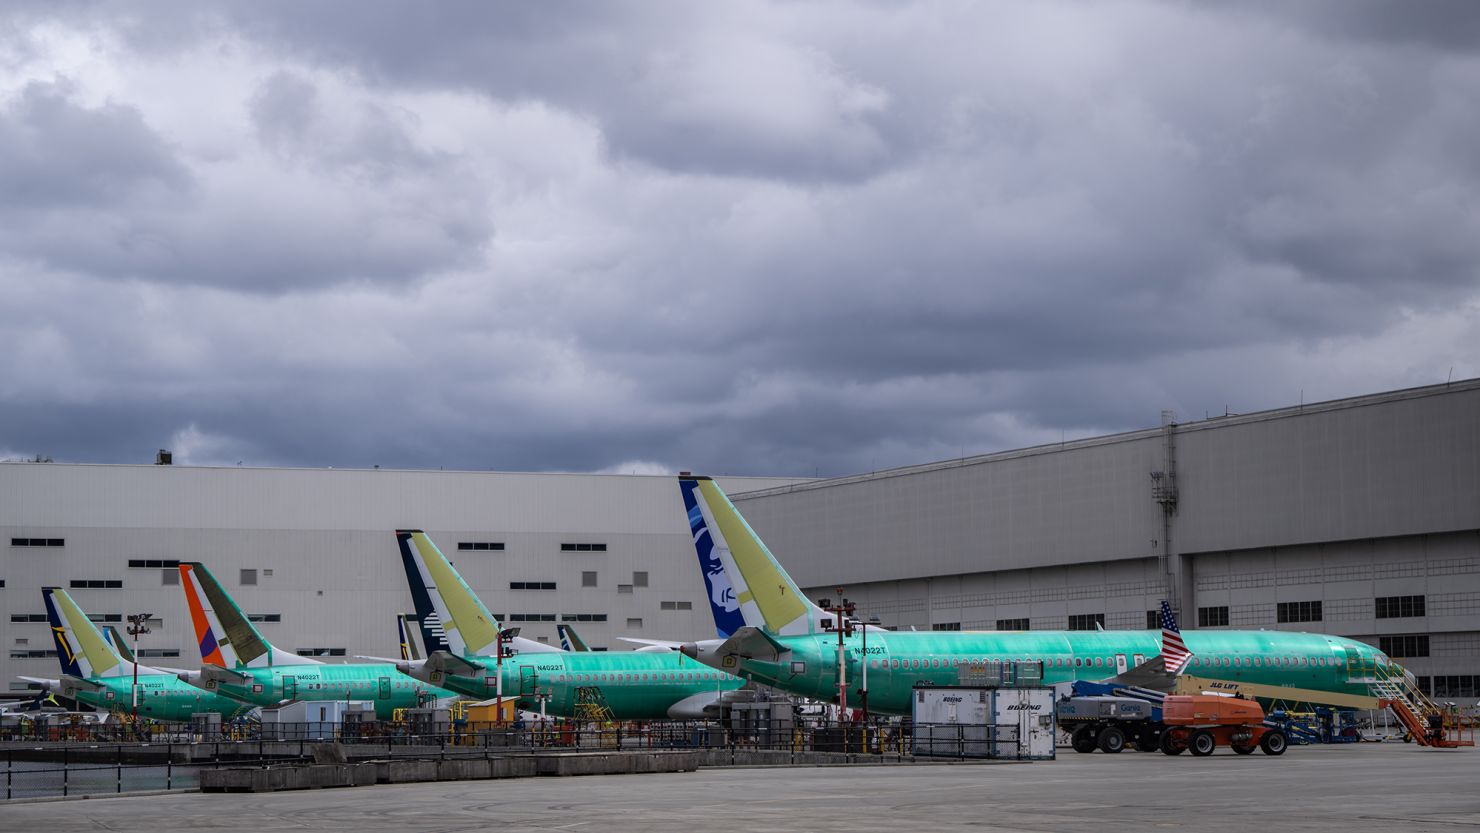 Boeing 737 MAX airplanes are pictured outside a Boeing factory in Renton, Washington. The company reported another quarterly loss for the first three months of the year Wednesday.